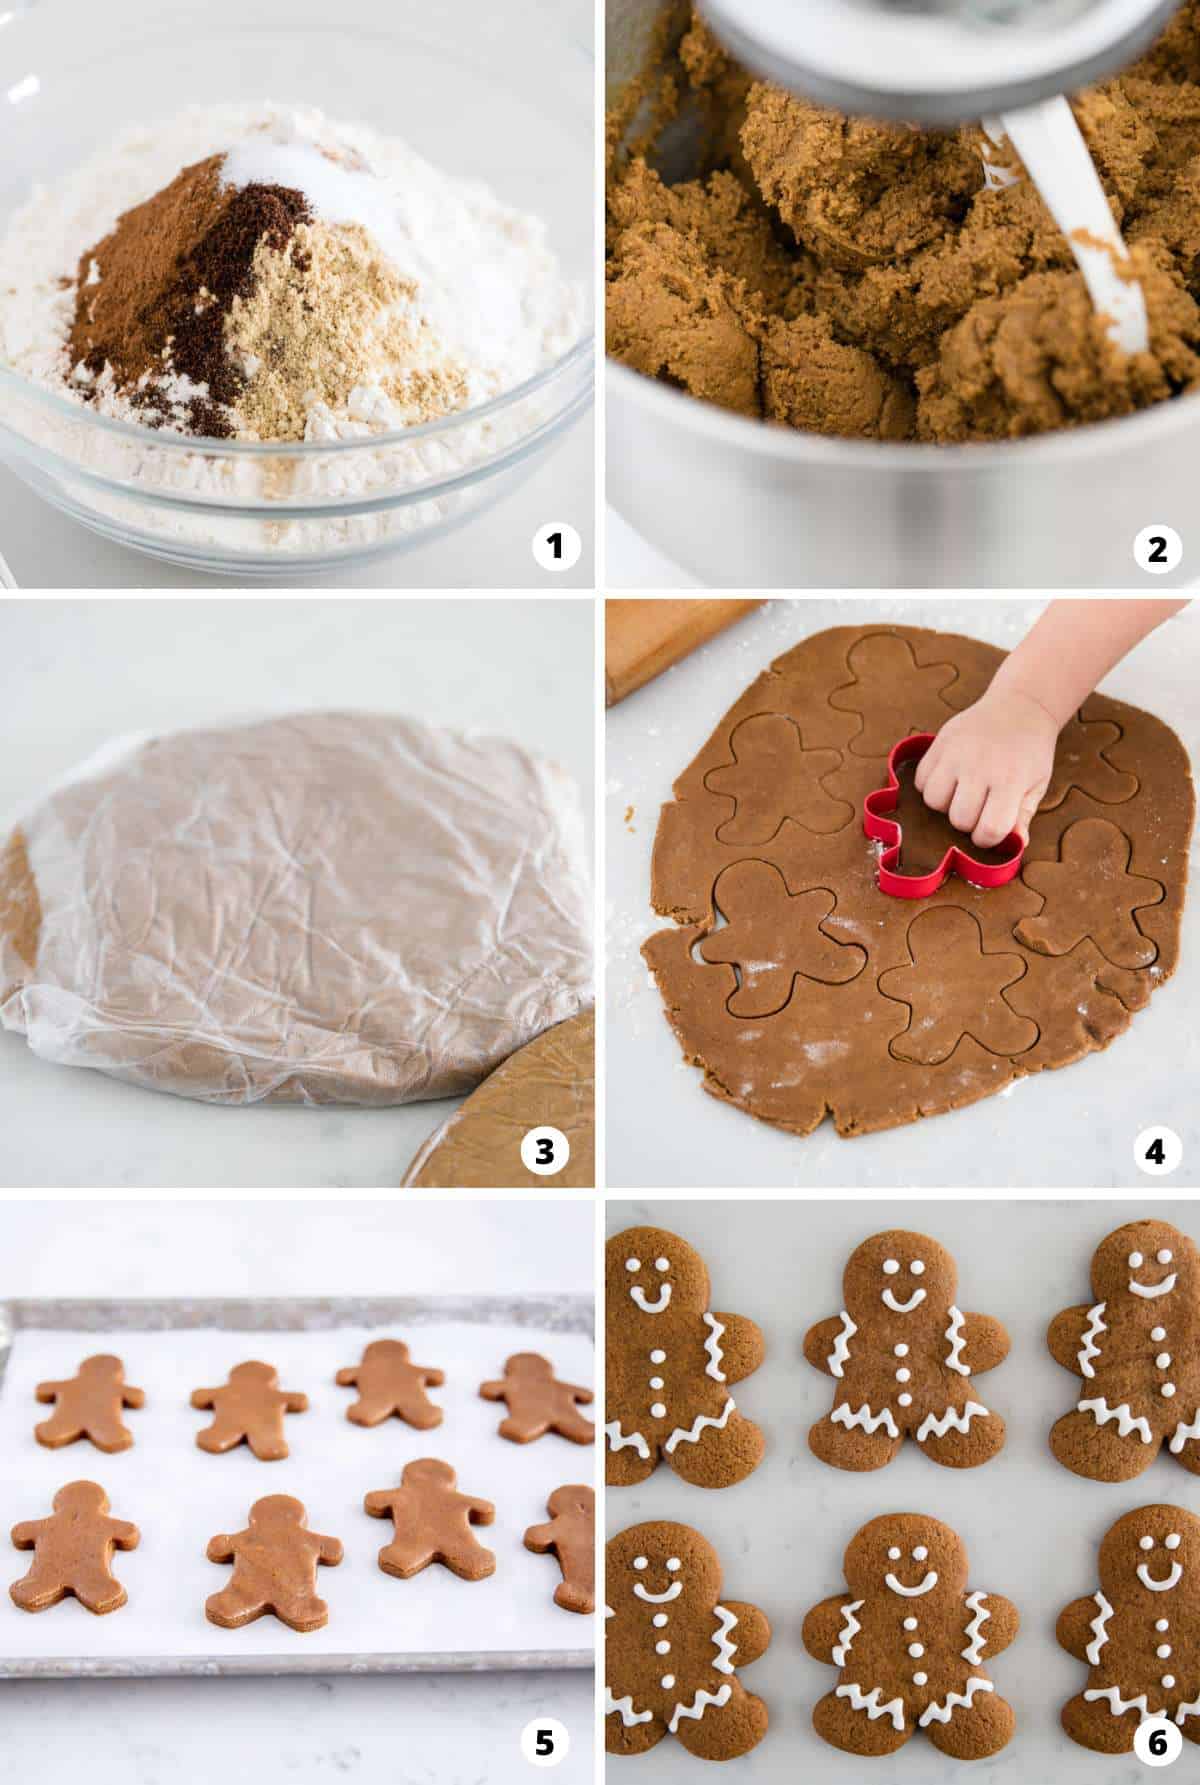 Showing how to make gingerbread man cookies in a 6 step collage.